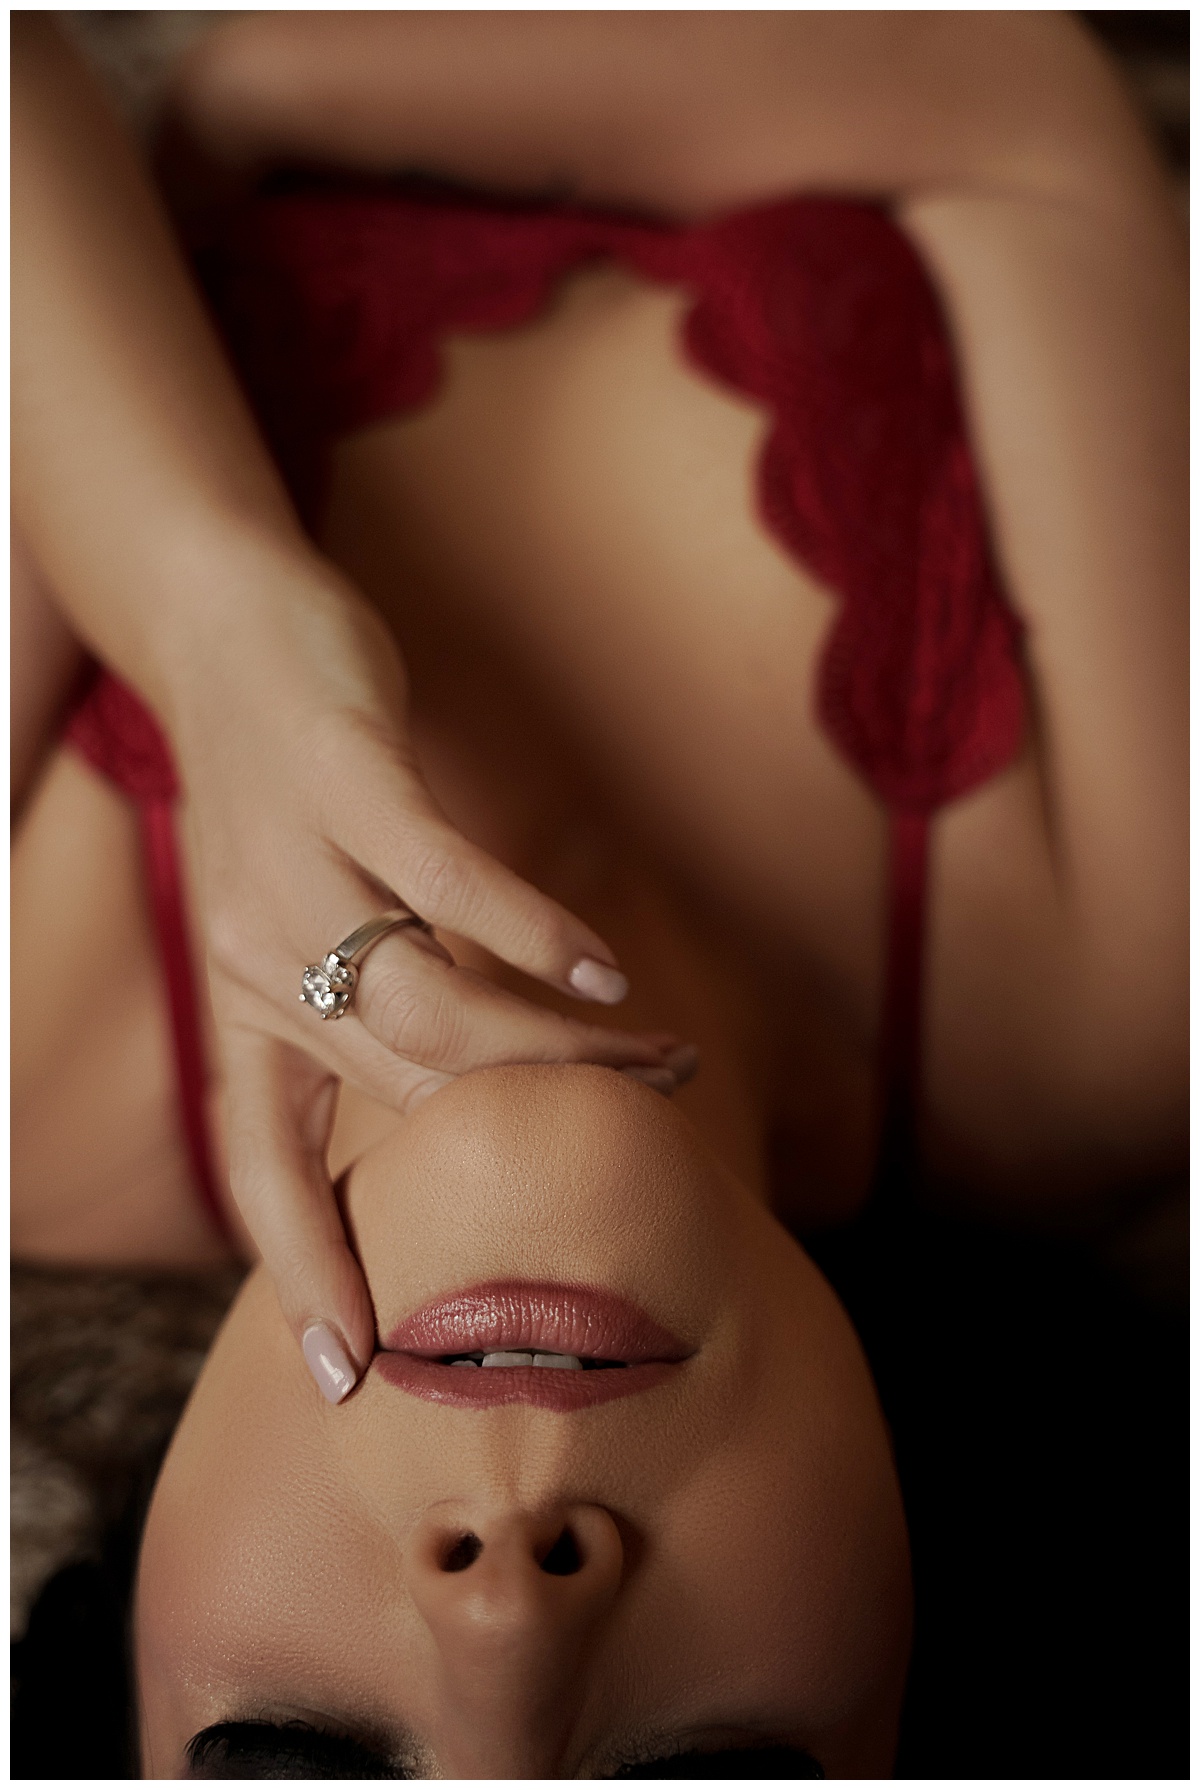 Woman wears red lingerie for Sioux Falls Boudoir Photographer